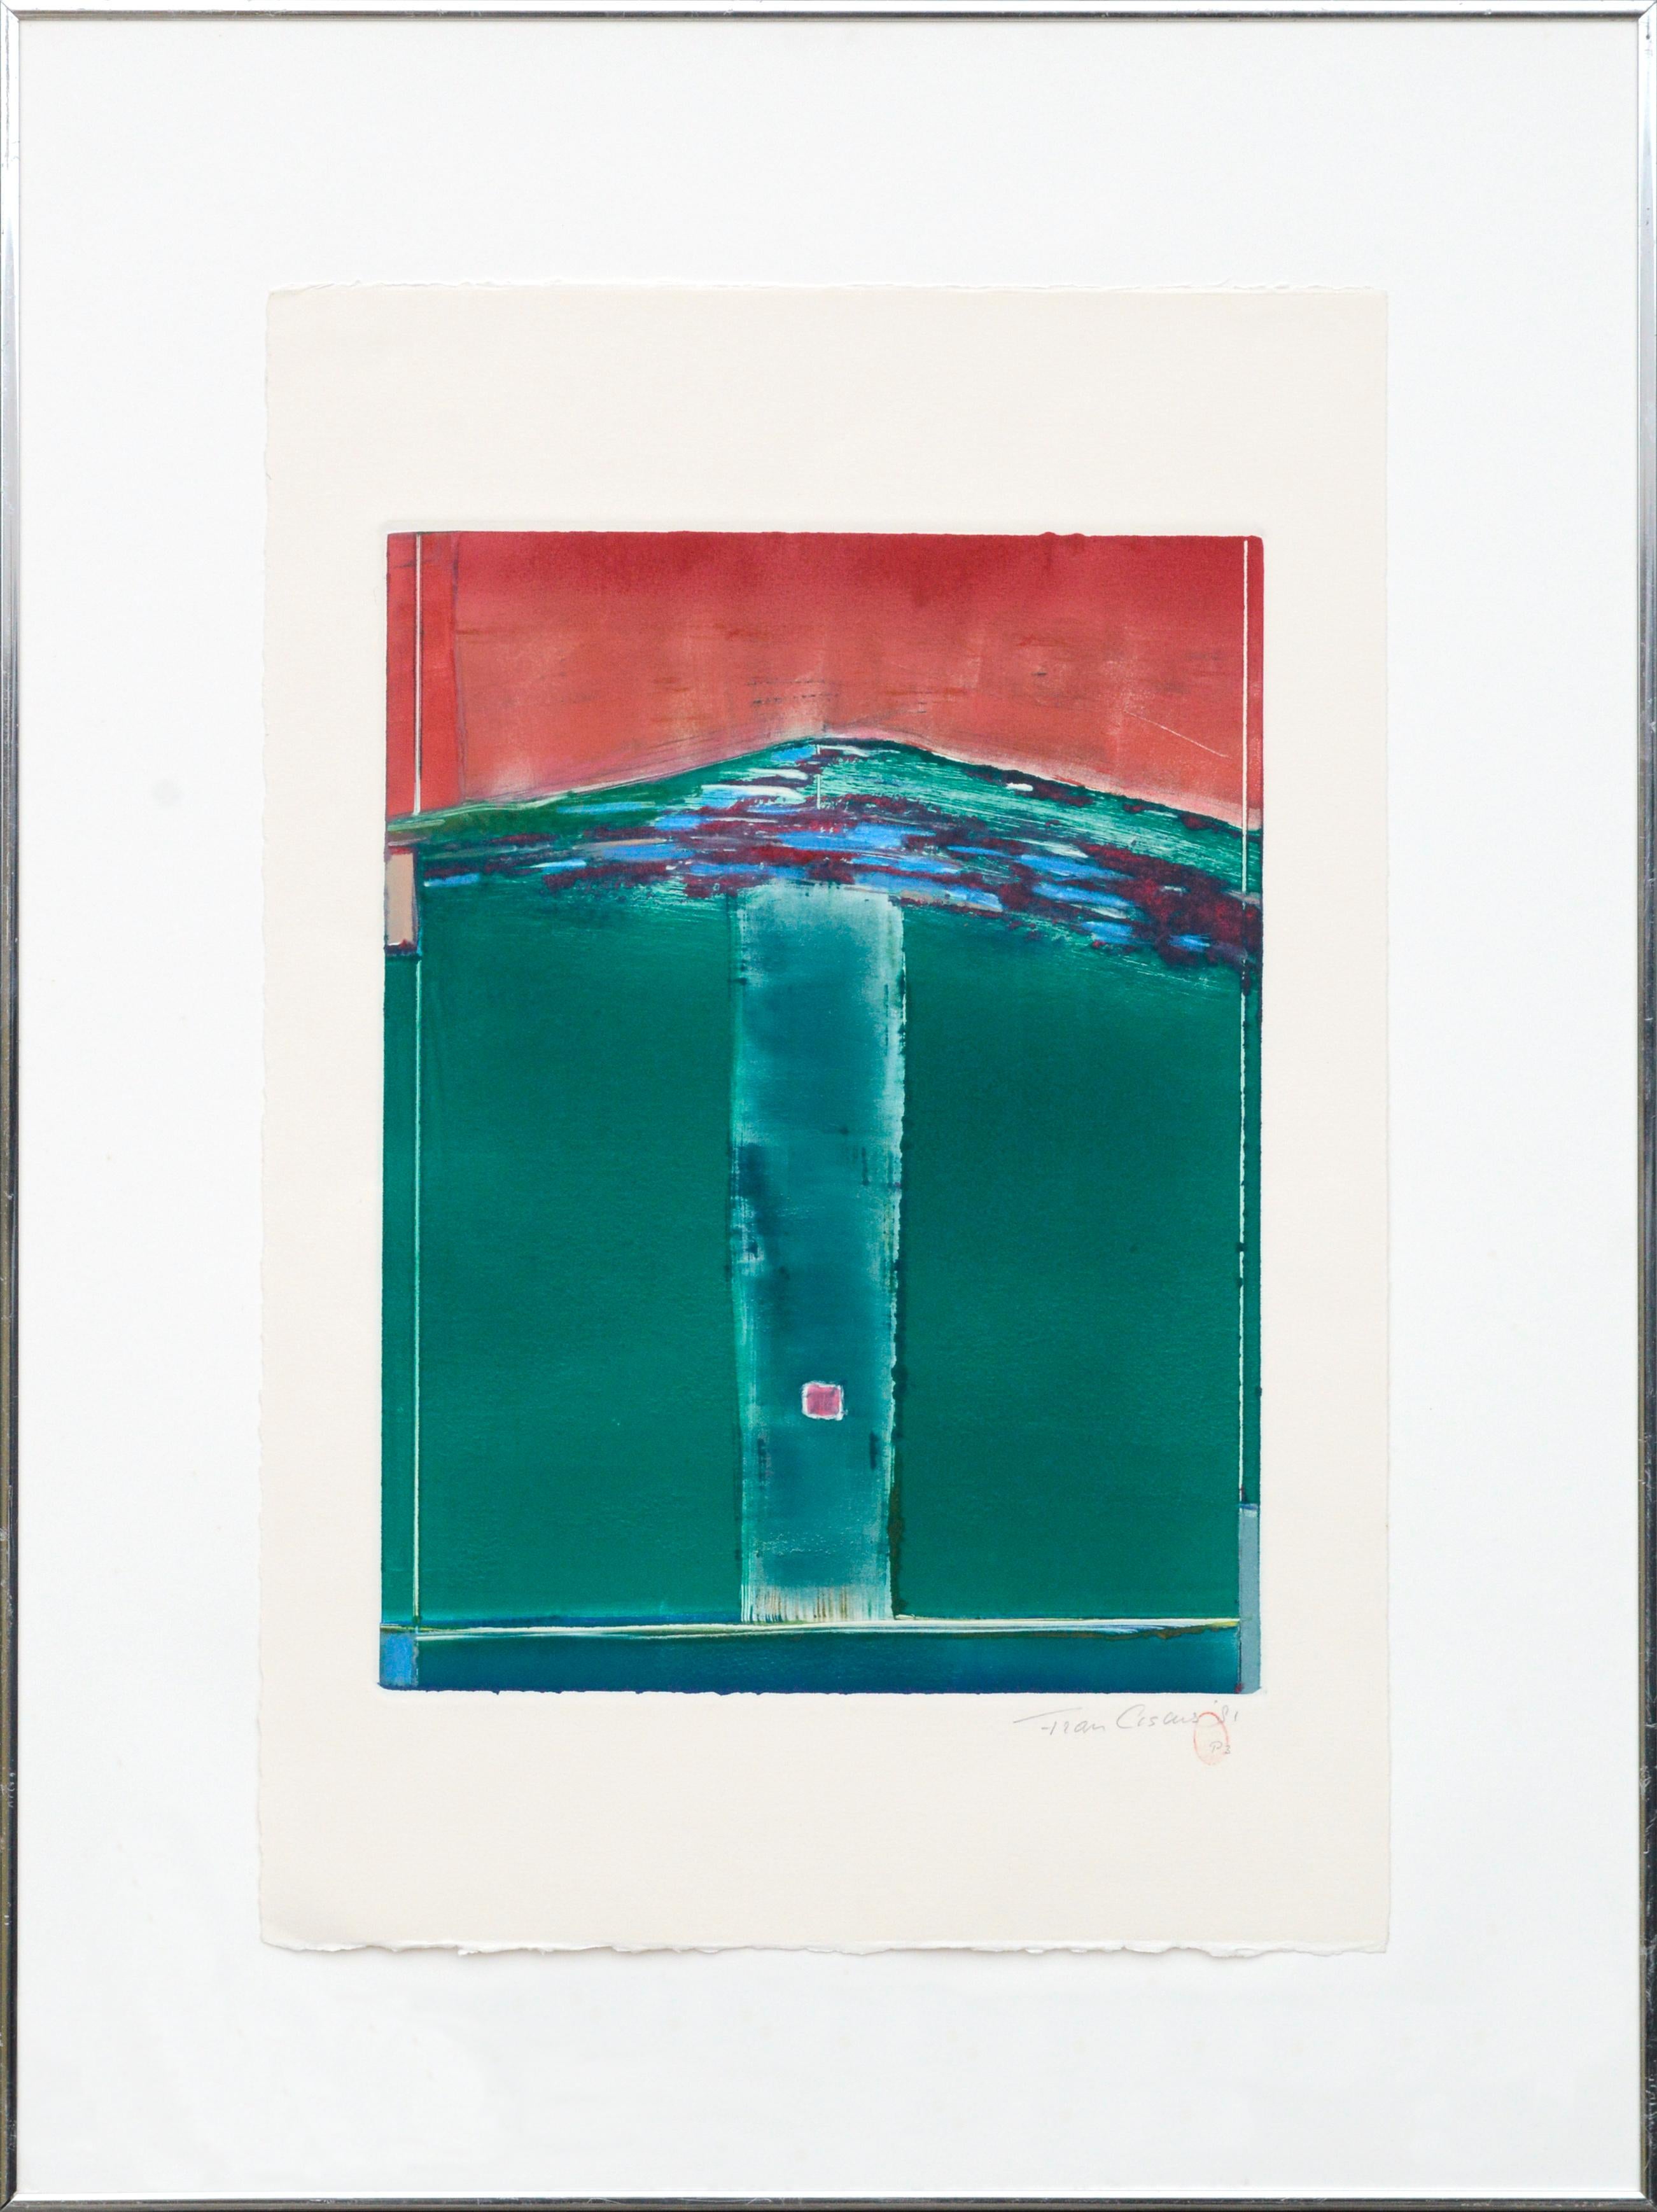 Fran Ciscus Abstract Print - "Under the Mountain" - Modern Abstract Lithograph 